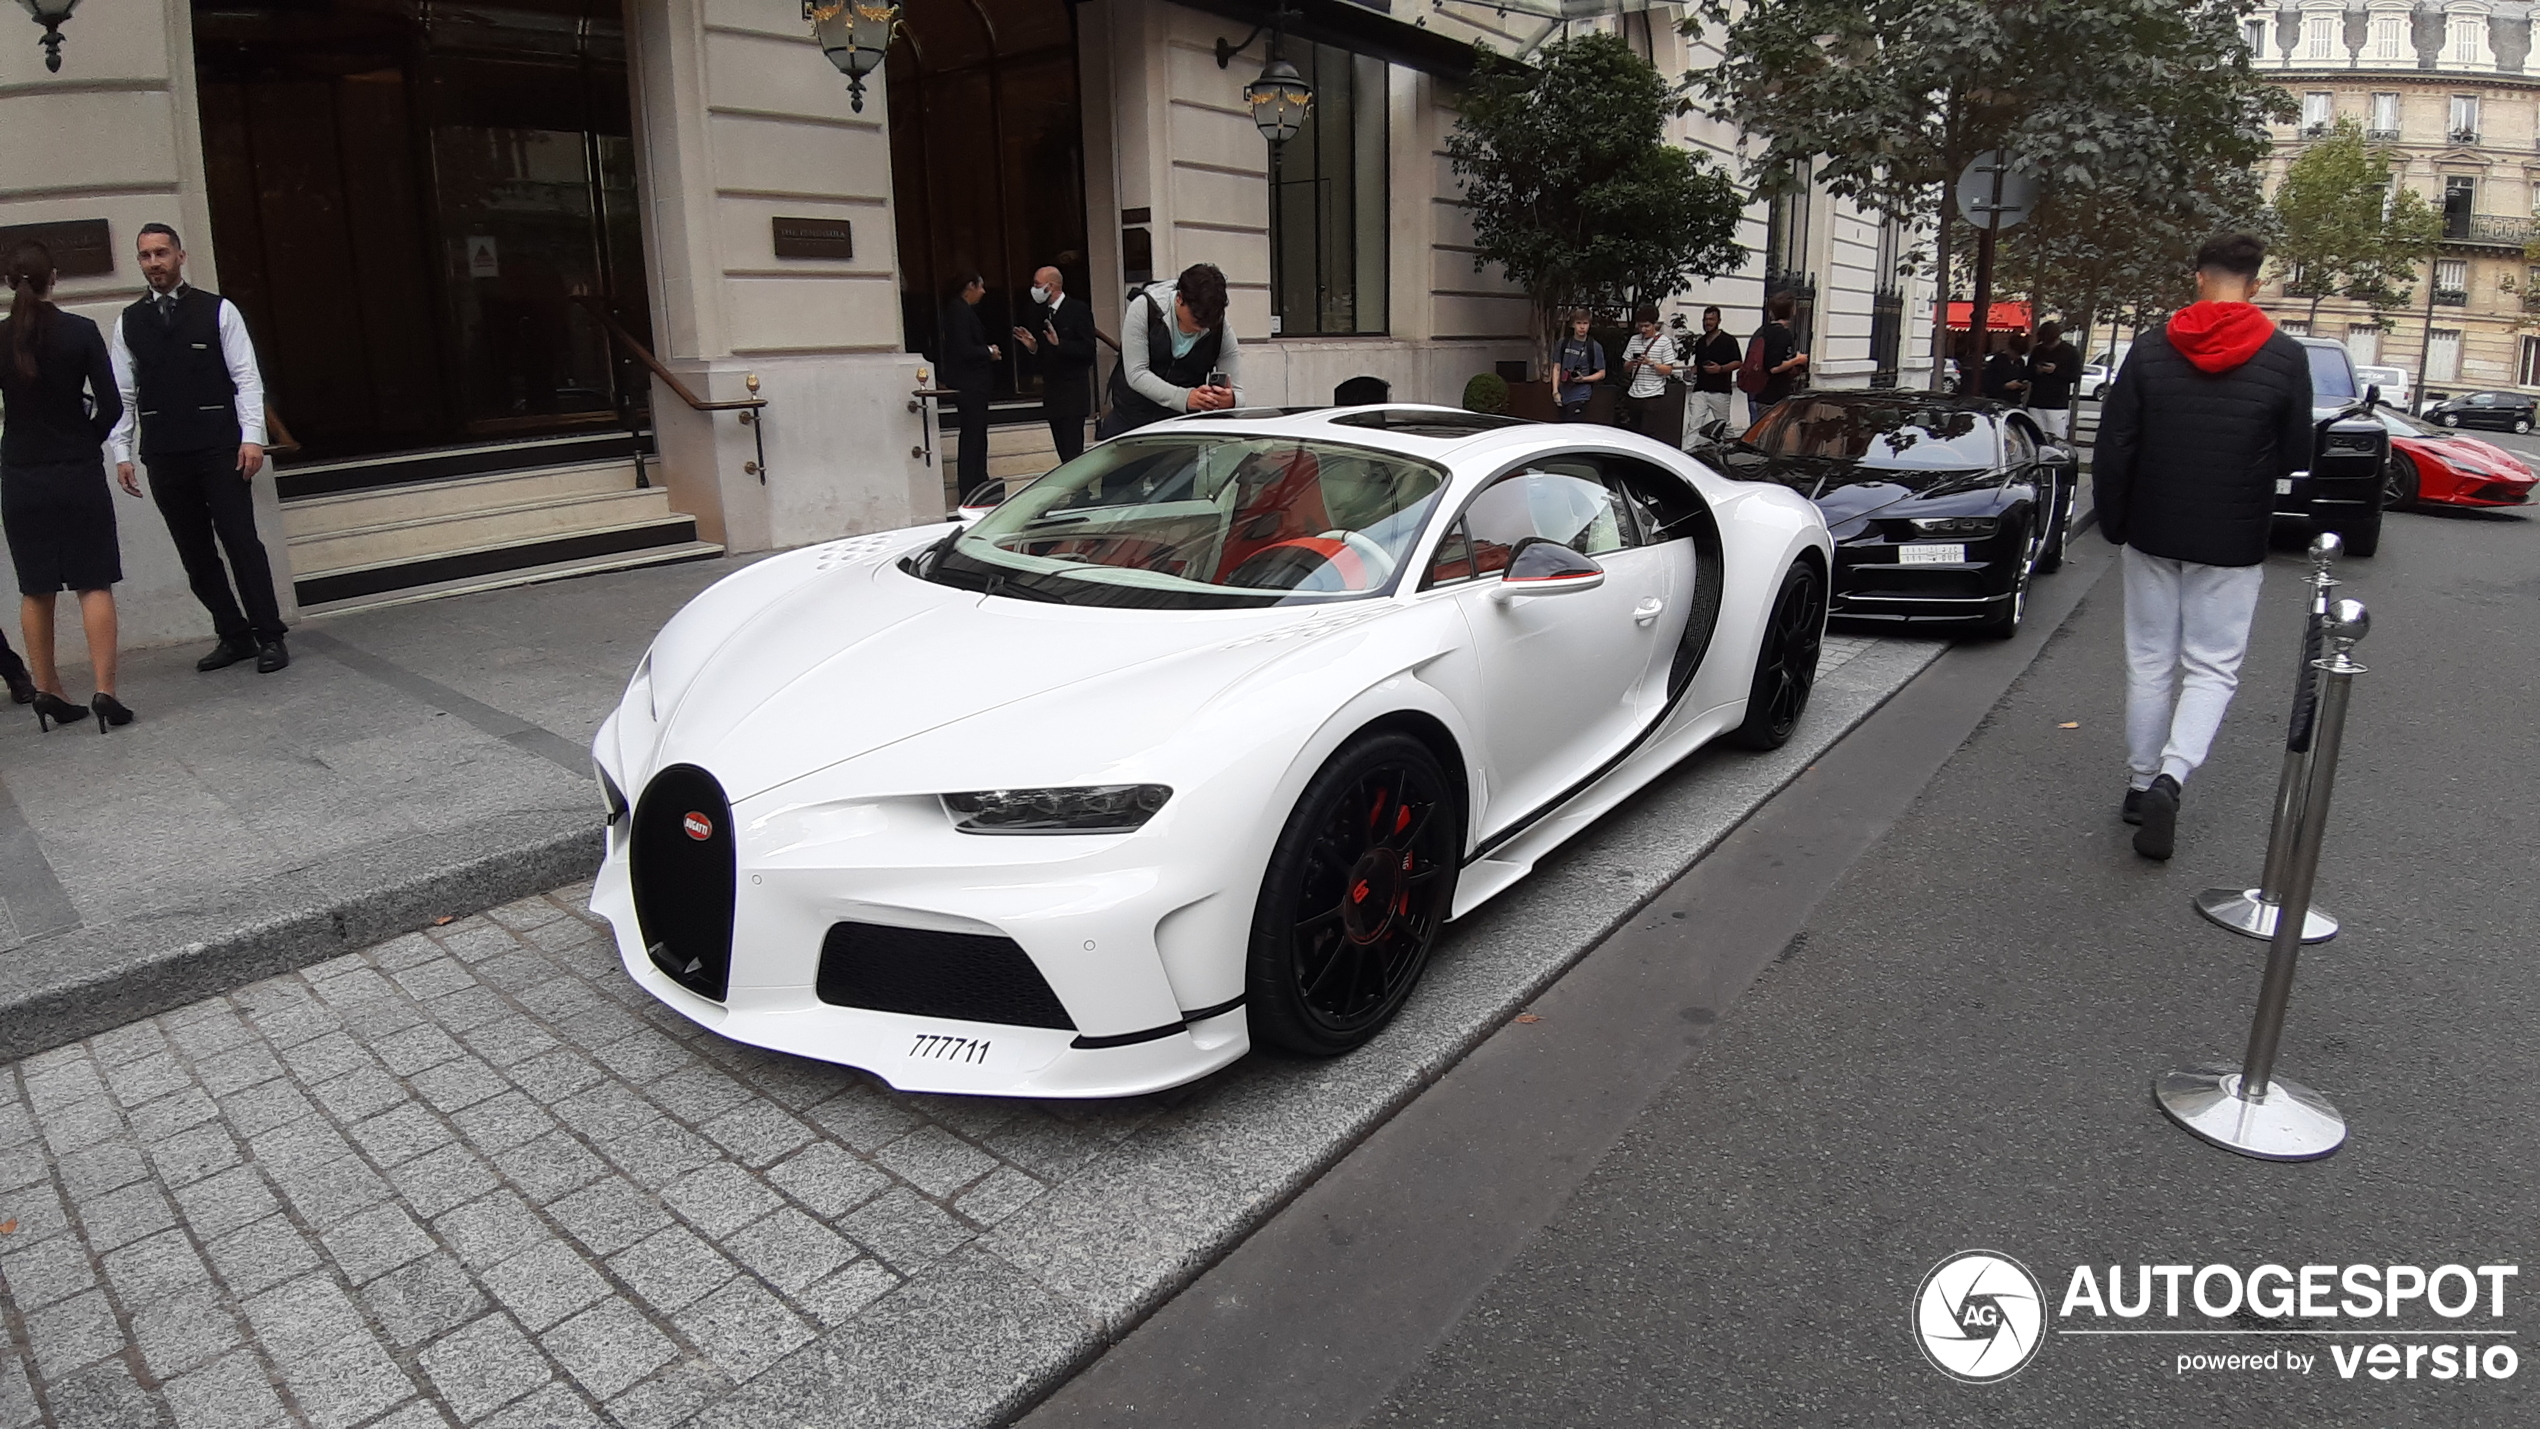 The Bugatti Chiron Super Sport Hermes One of One has now arrived in Paris